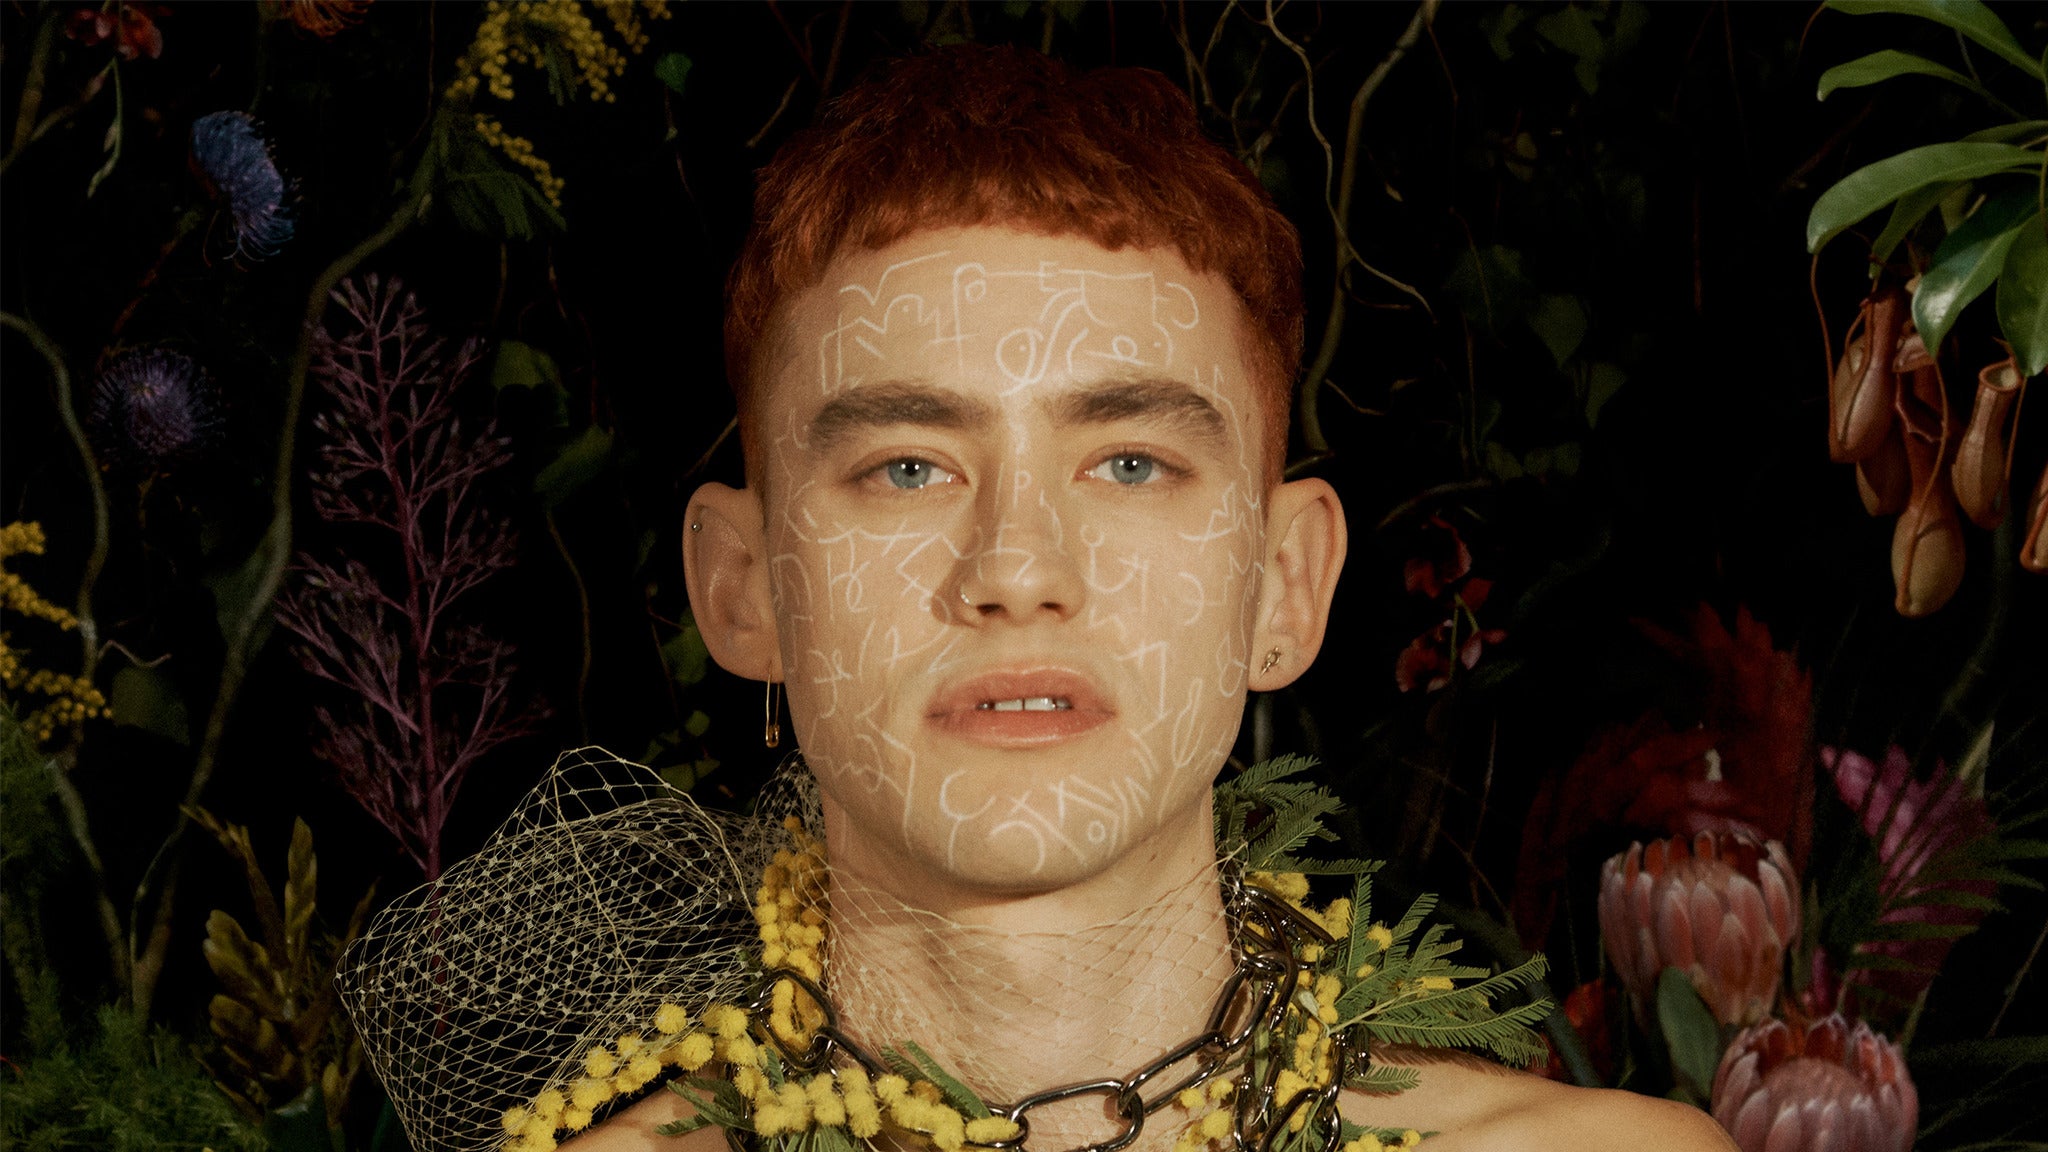 Years & Years pre-sale password